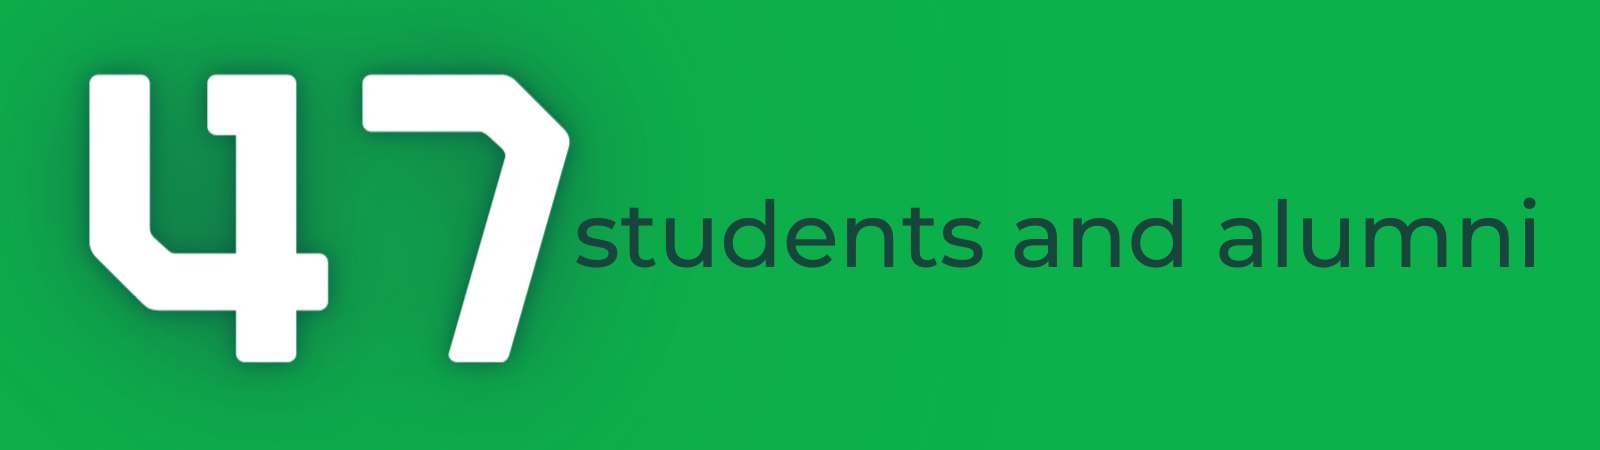 This image has a green background with white text that reads "47 students and alumni".